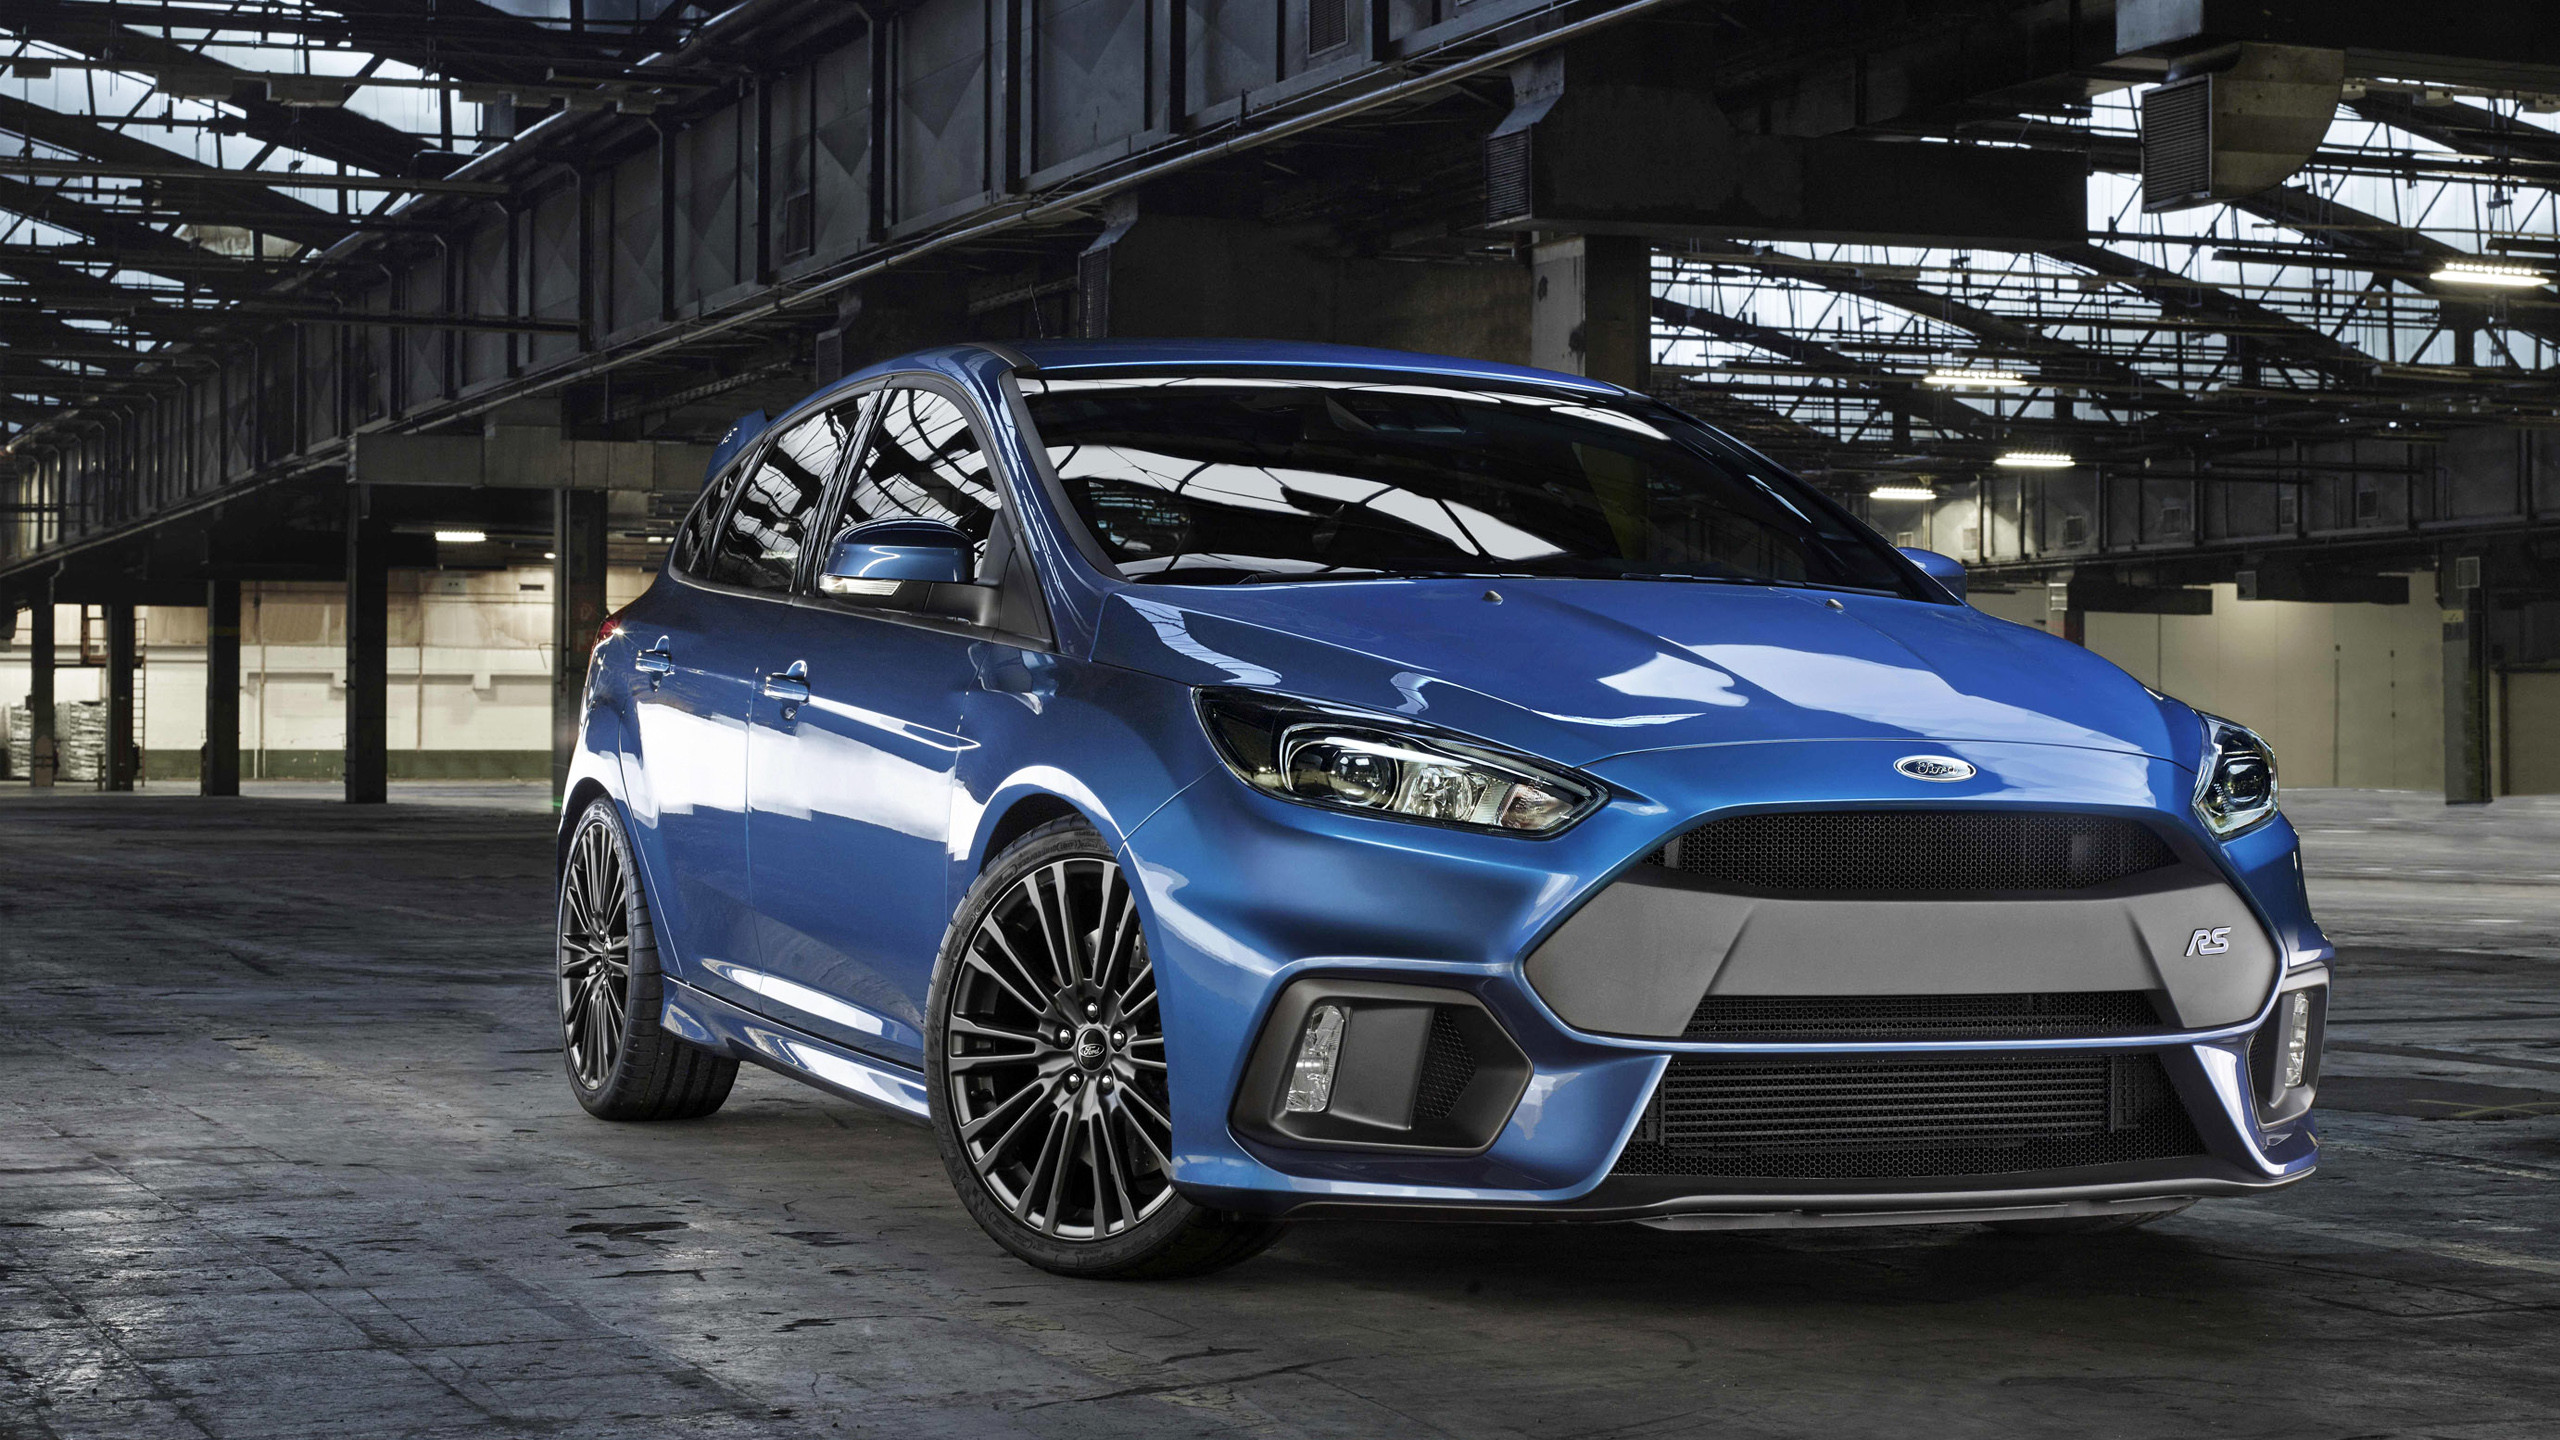 2560x1440 ... Ford Focus 2017 Pictures ...